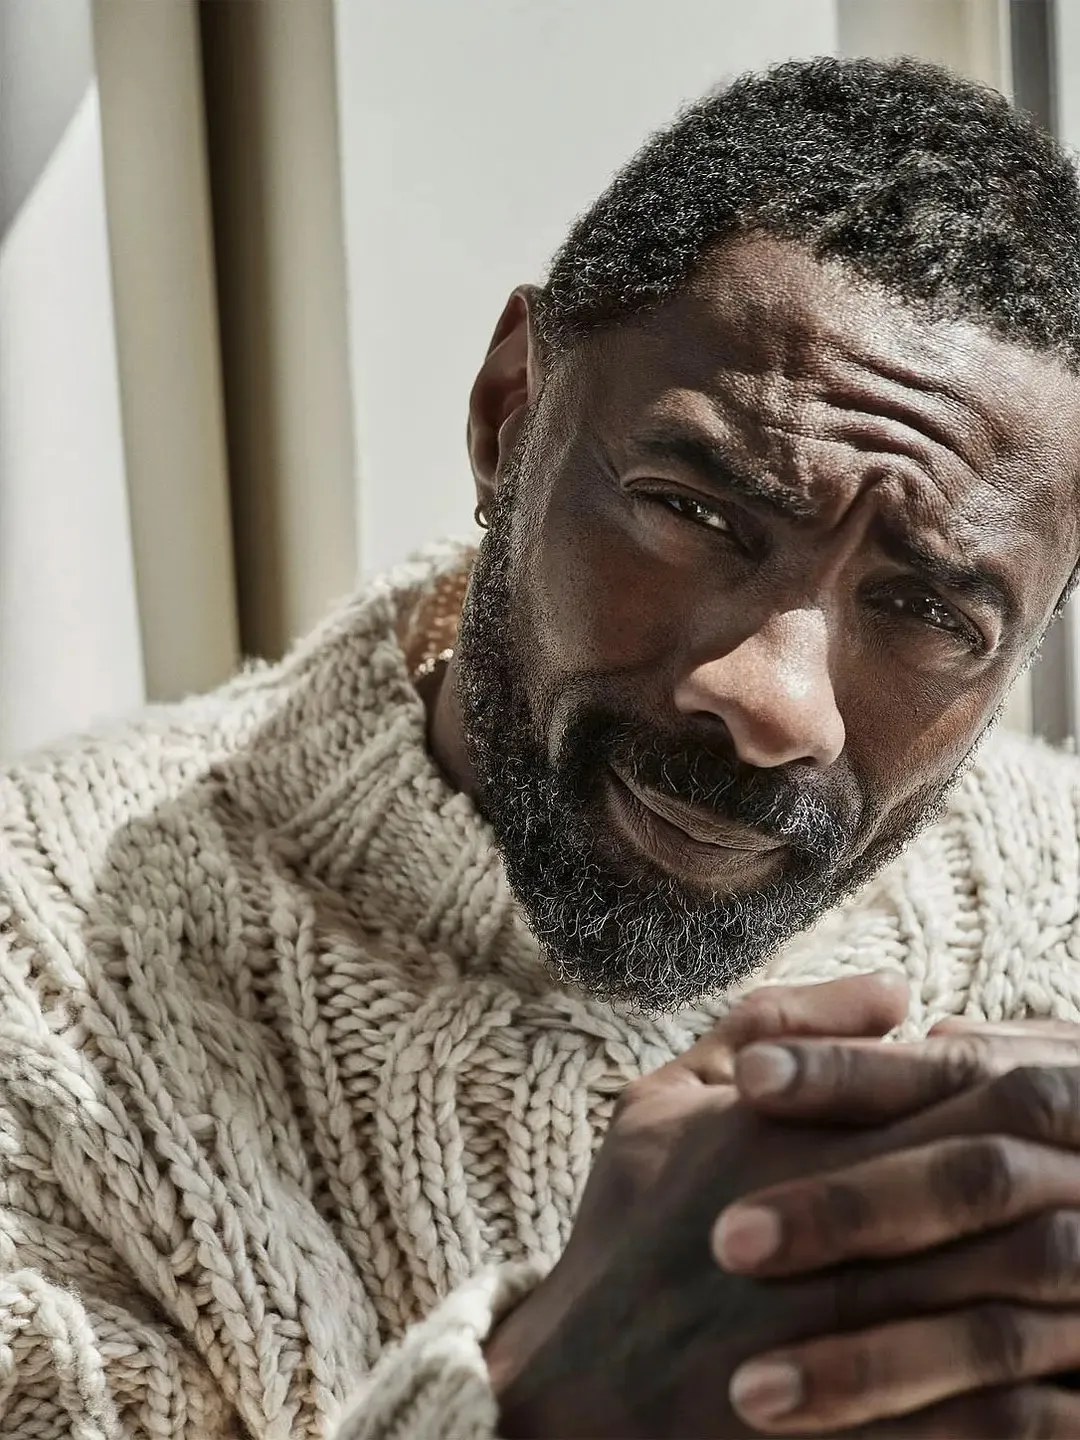 Idris Elba reveals his daughter auditioned for 'Beast' and want to play his role's daughter | FMV6